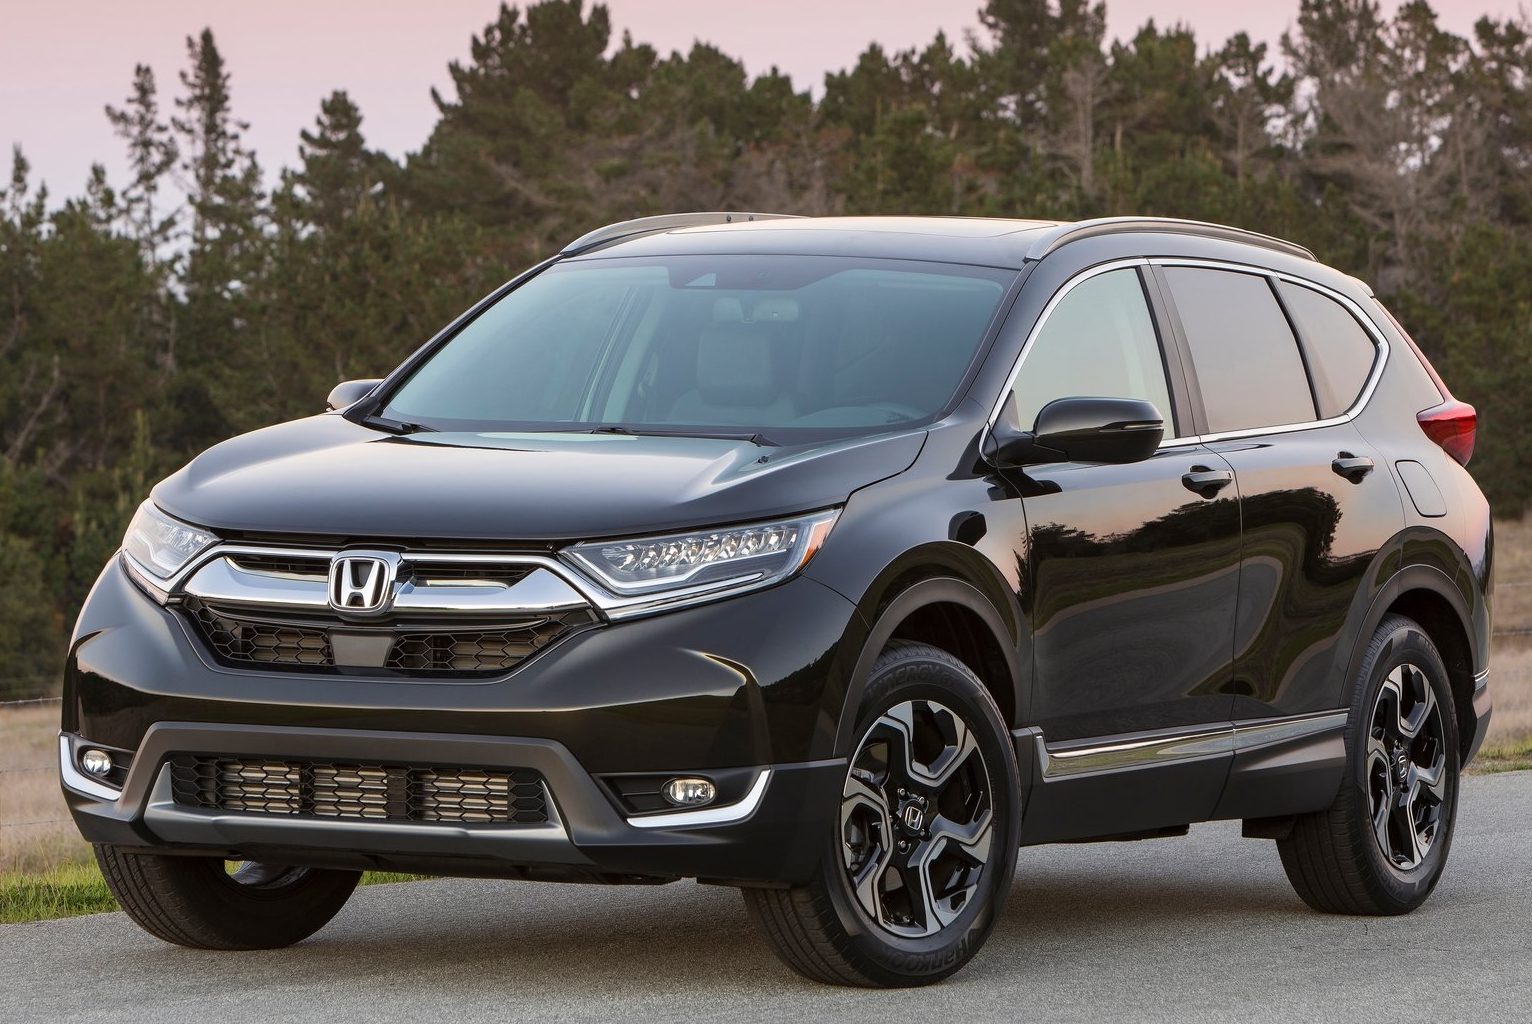 2017 Honda CR-V Review, Ratings, Specs, Prices, And Photos